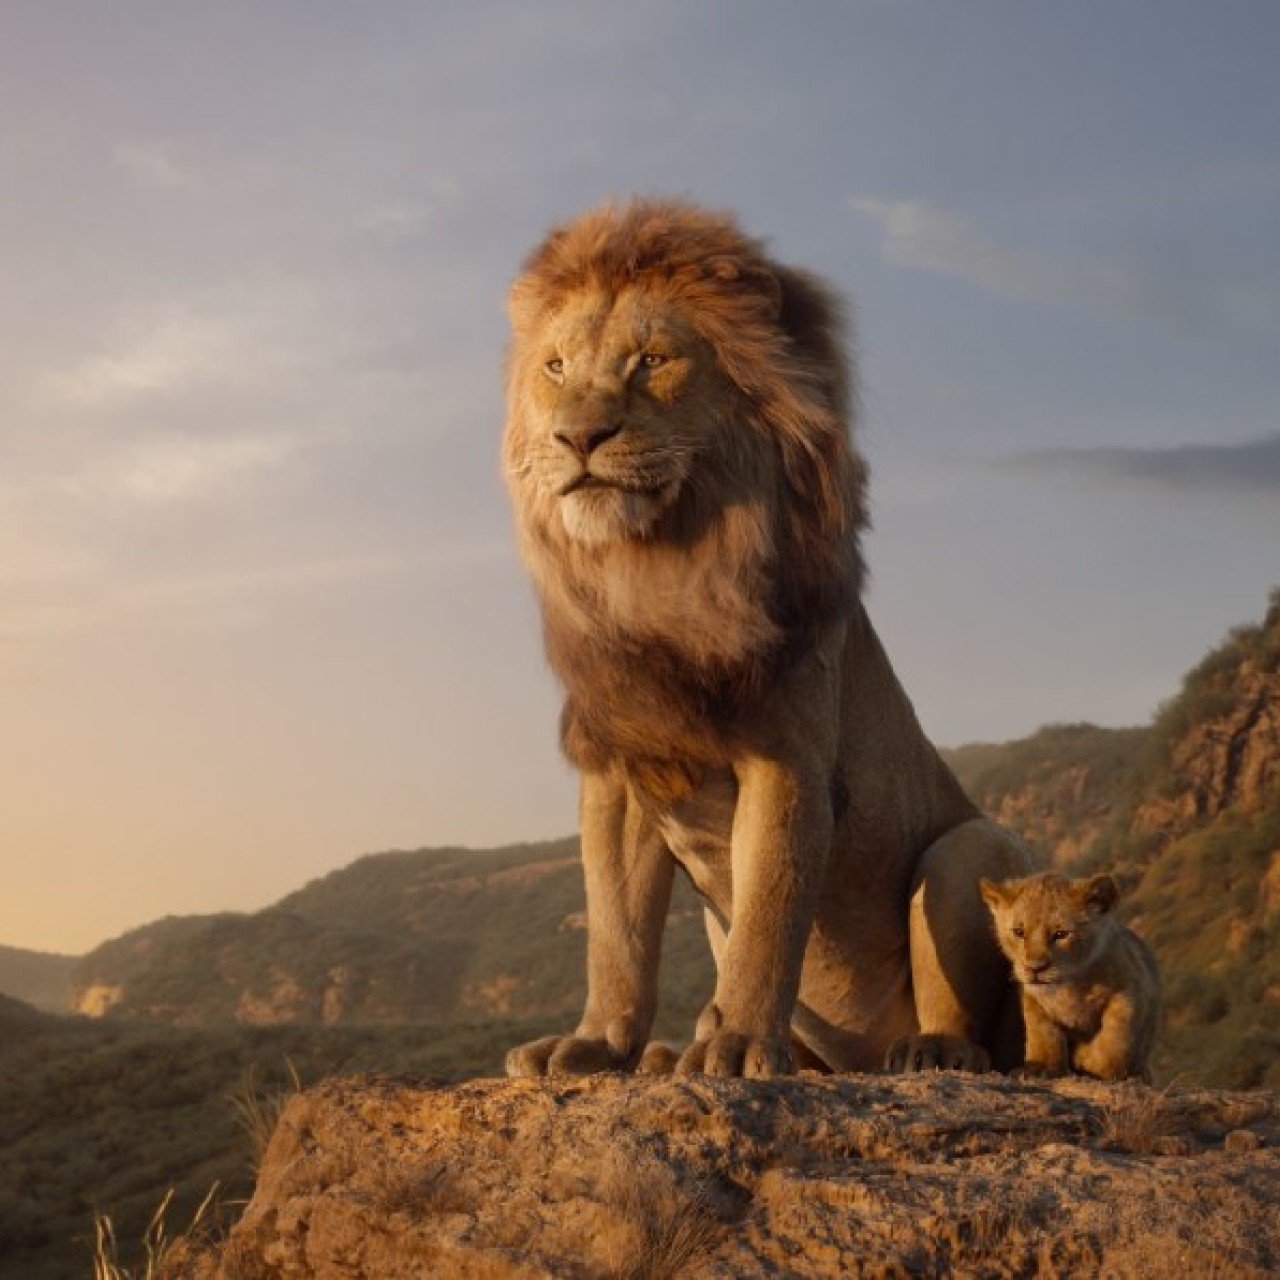 5 Powerful Life Lessons We Can All Learn From Disney's 'The Lion King' - Yp | South China Morning Post